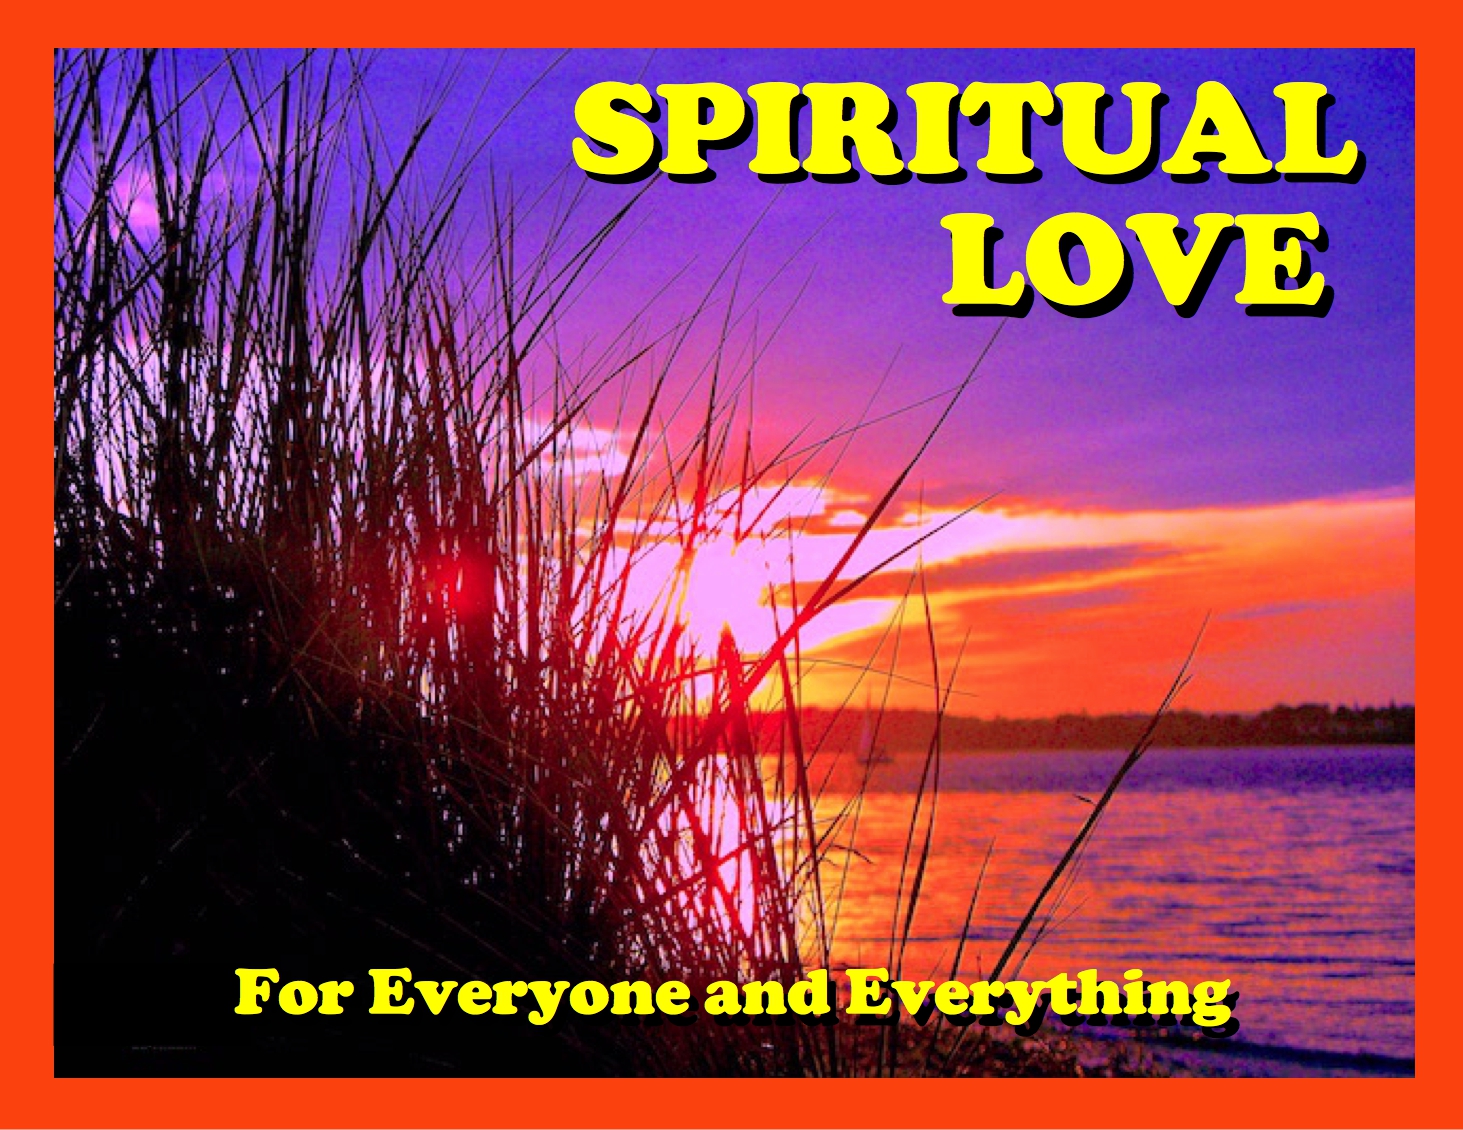 ------------------------------------PANEL-SPIRITUAL-LOVE-FOR-EVERYONE-AND-EVERYTHING-A-DKP-------------------------------------------PANEL-SPIRITUAL-LOVE-FOR-EVERYONE-AND-EVERYTHING-A-DKP--